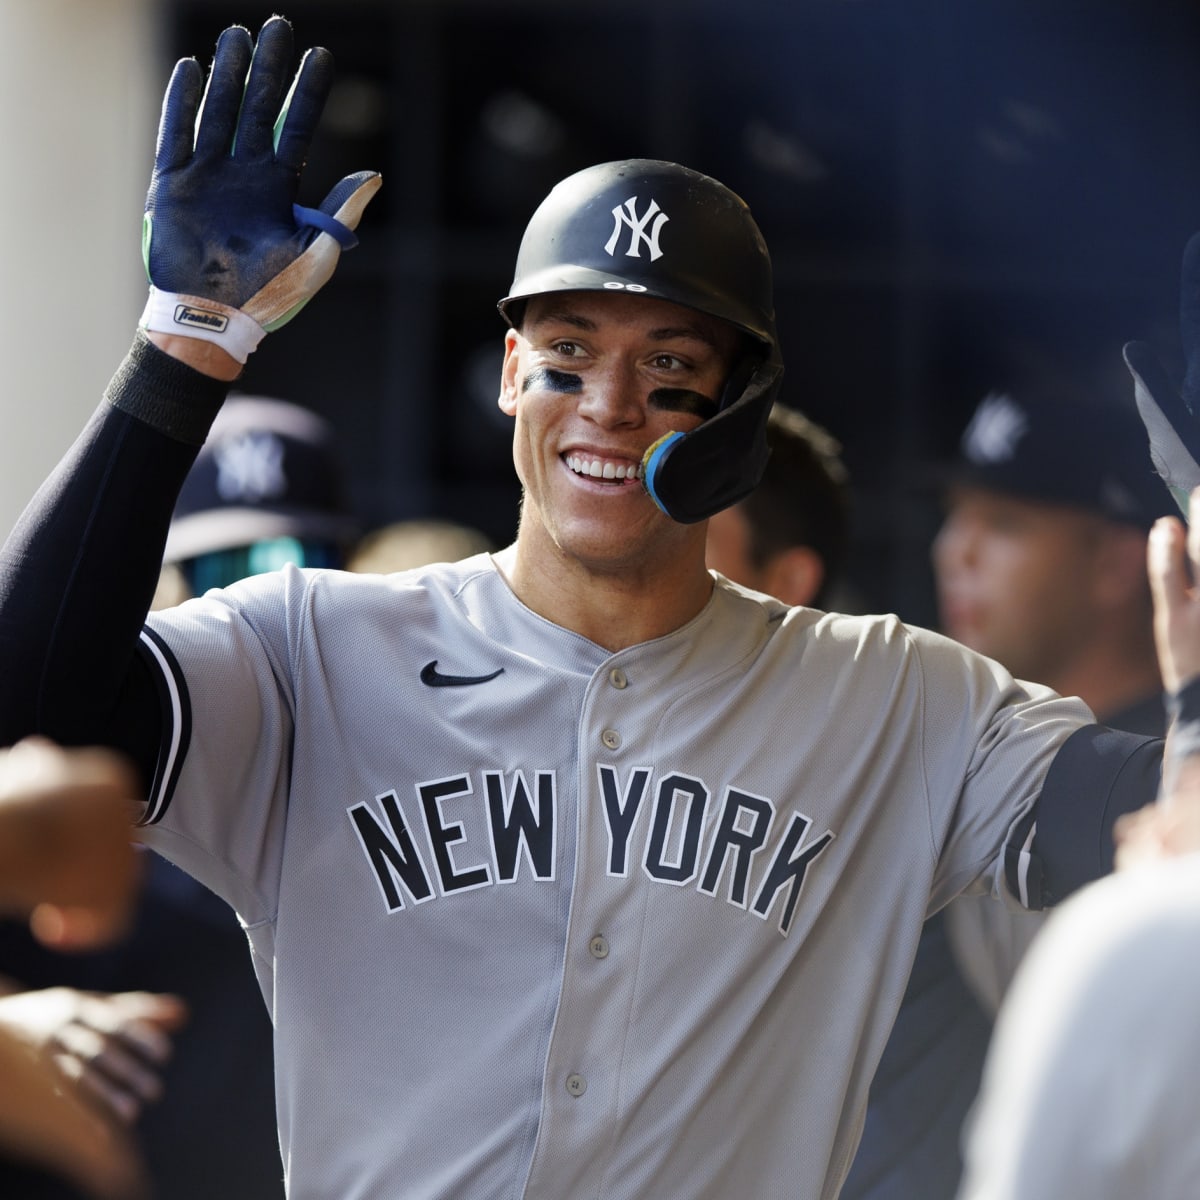 Yankees Notebook: Aaron Judge still has hurdles to clear